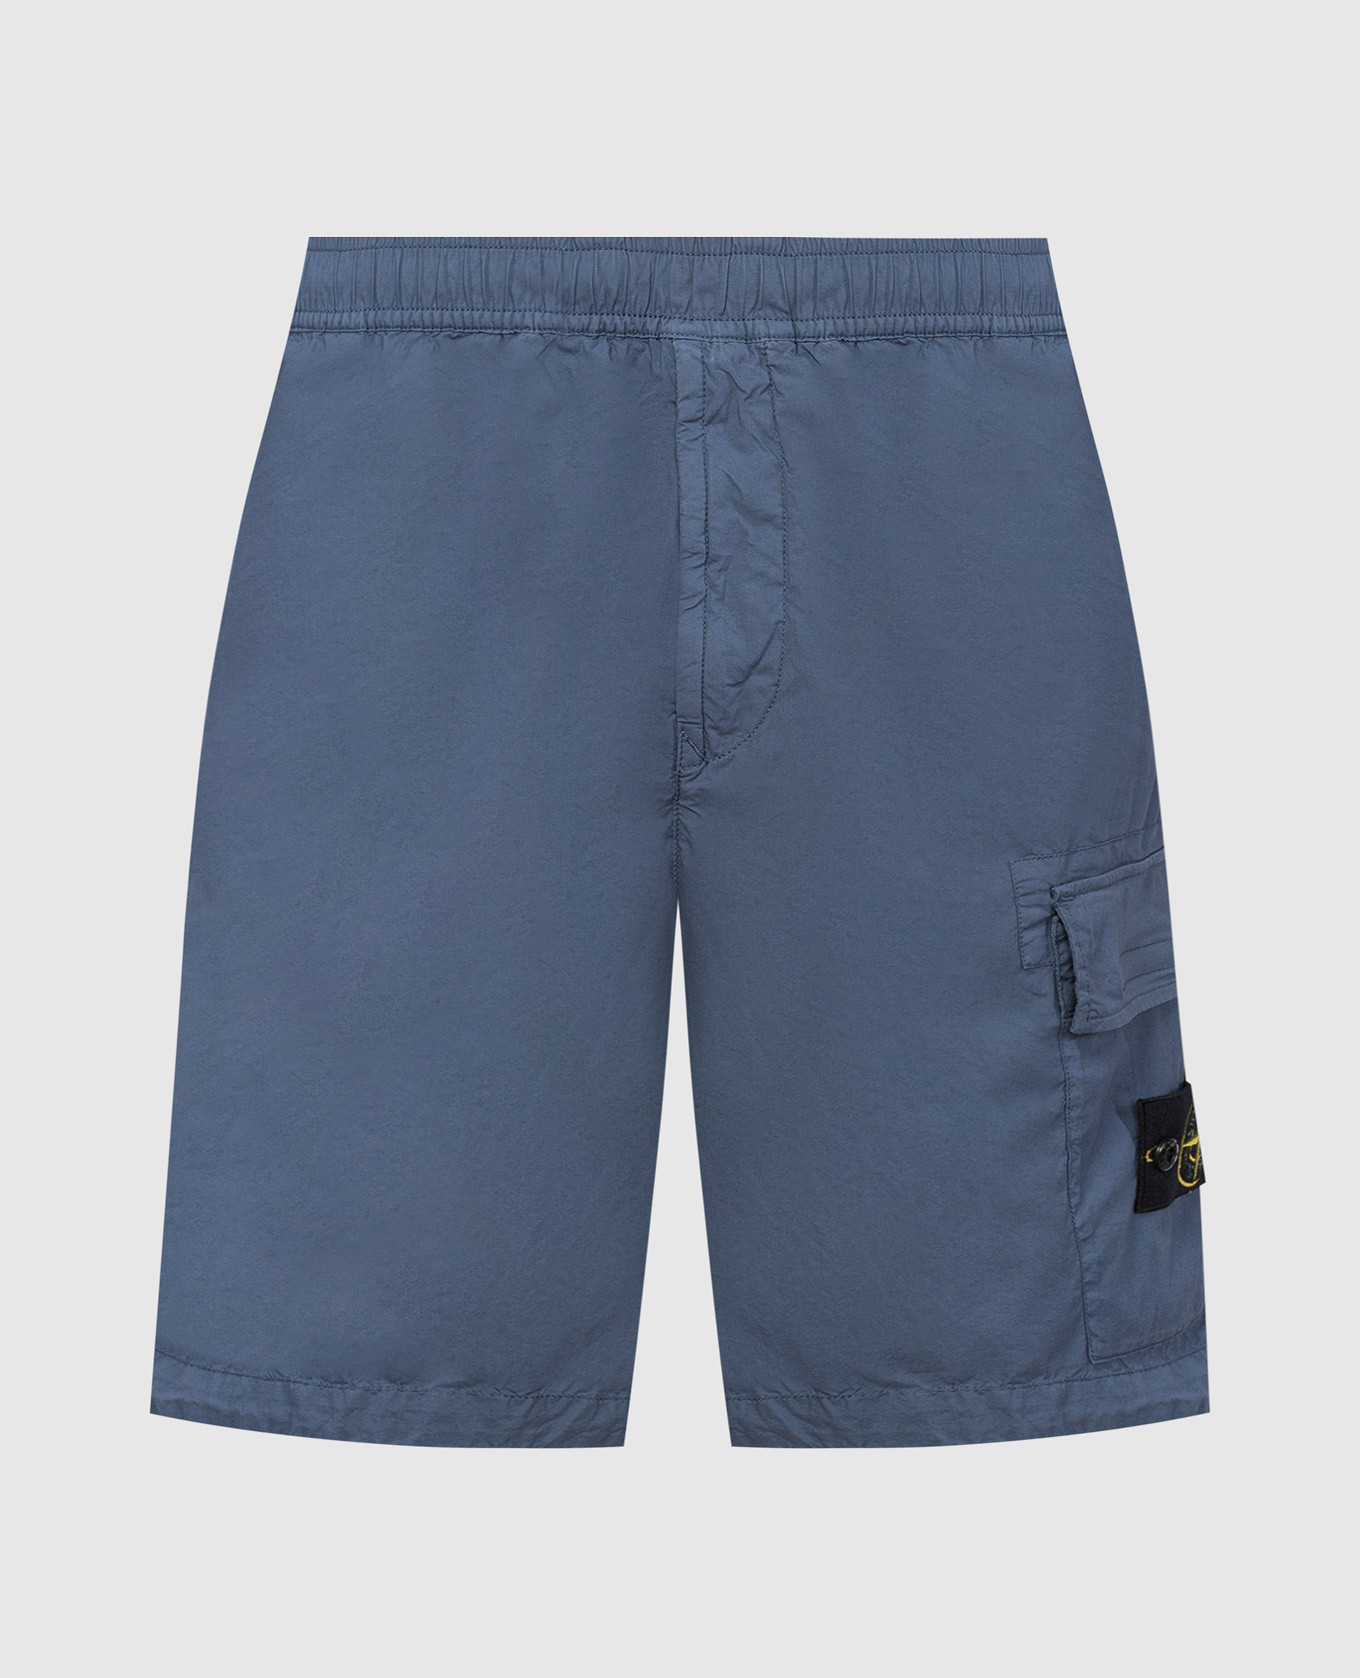 Blue shorts with removable logo patch